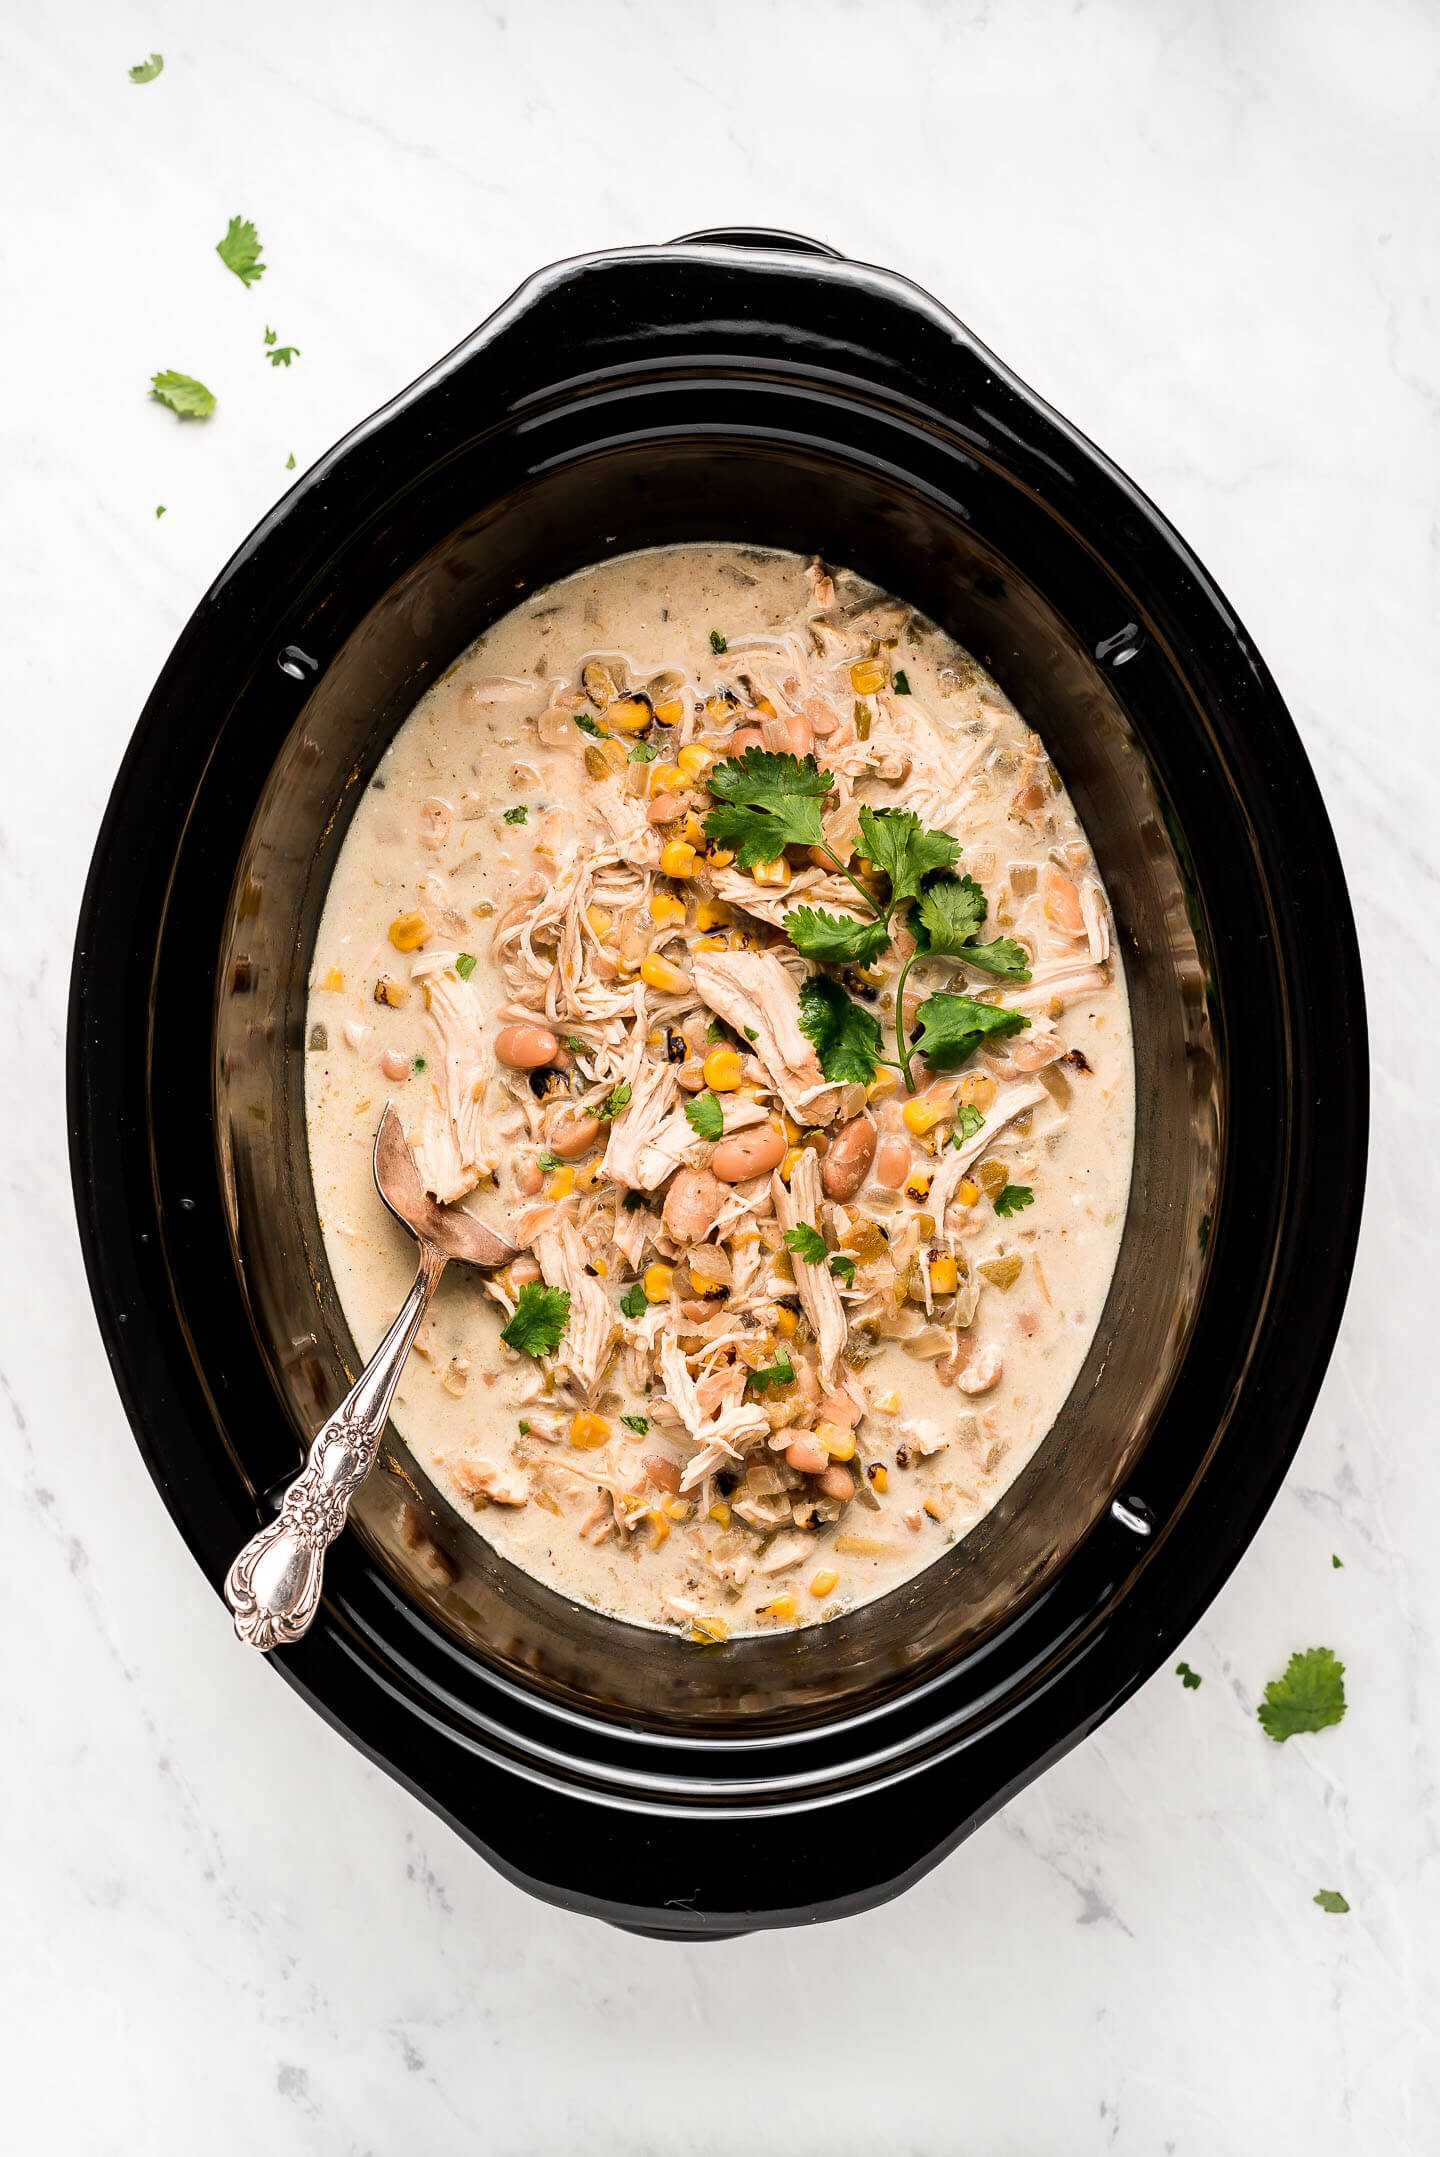 A slow cooker filled with a white creamy soup with chicken corn, white beans, and cilantro.